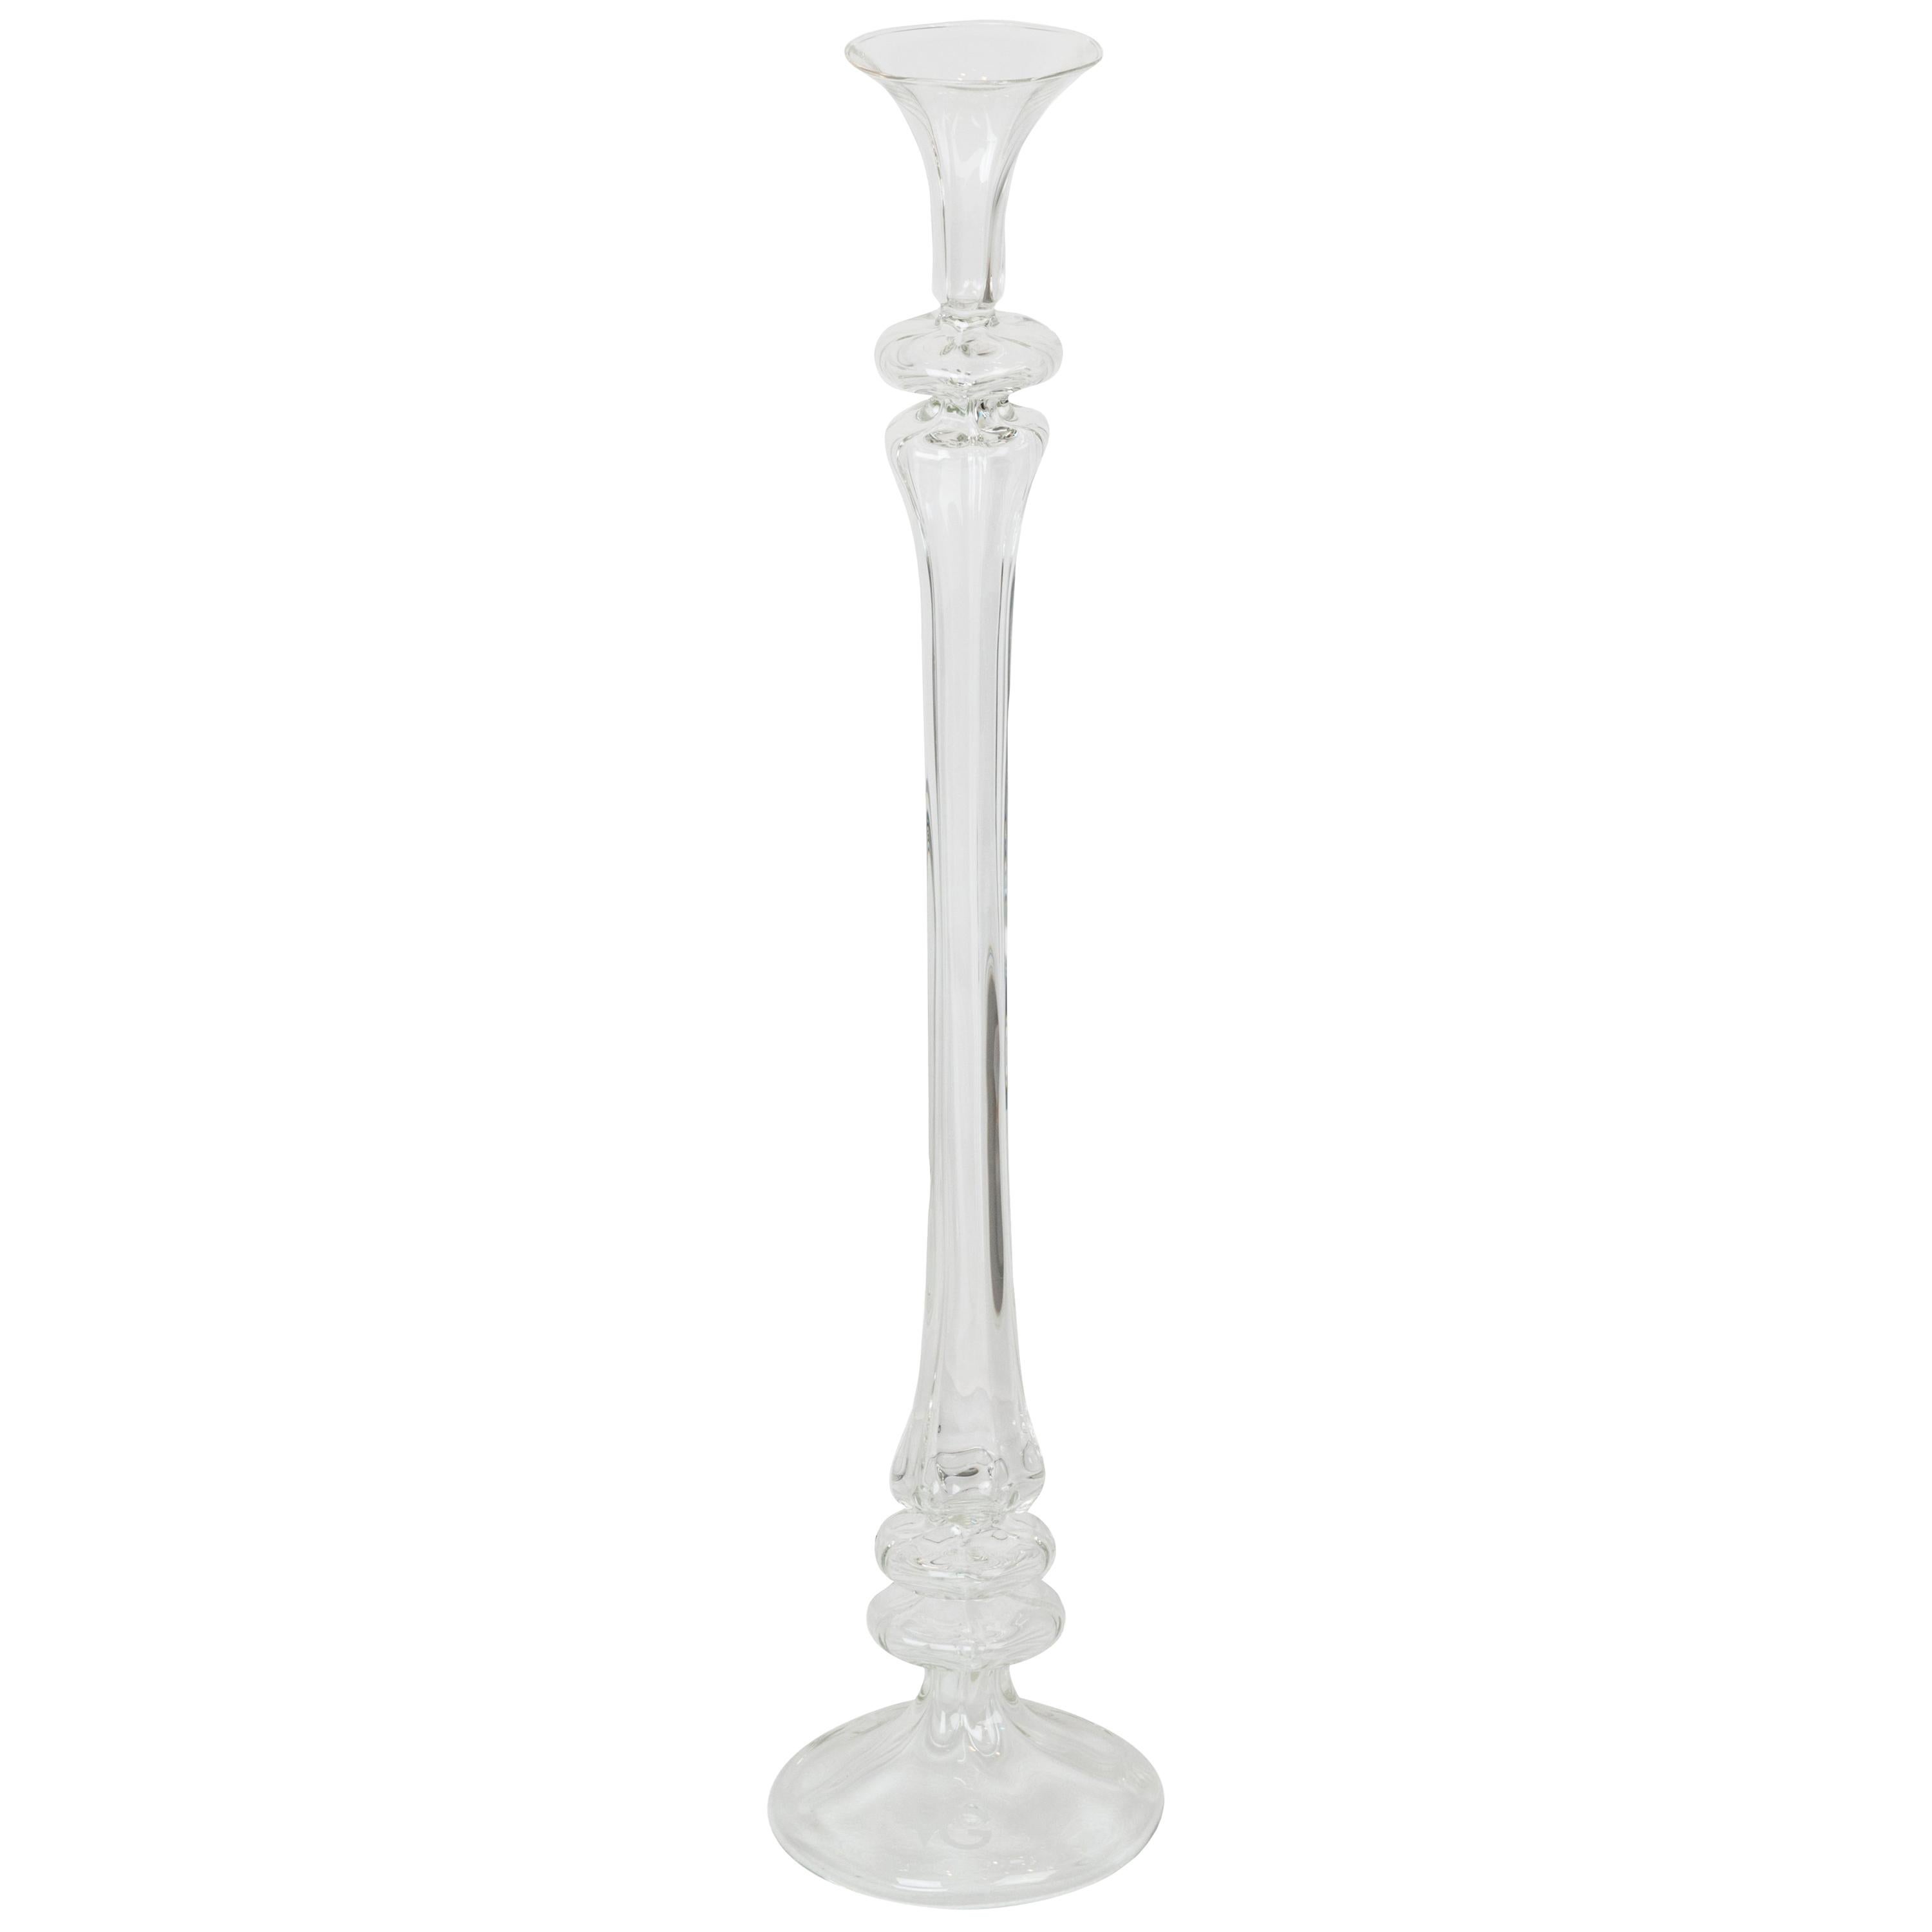 Candleholder Royal Pyrex Medium, in Pyrex, Italy For Sale